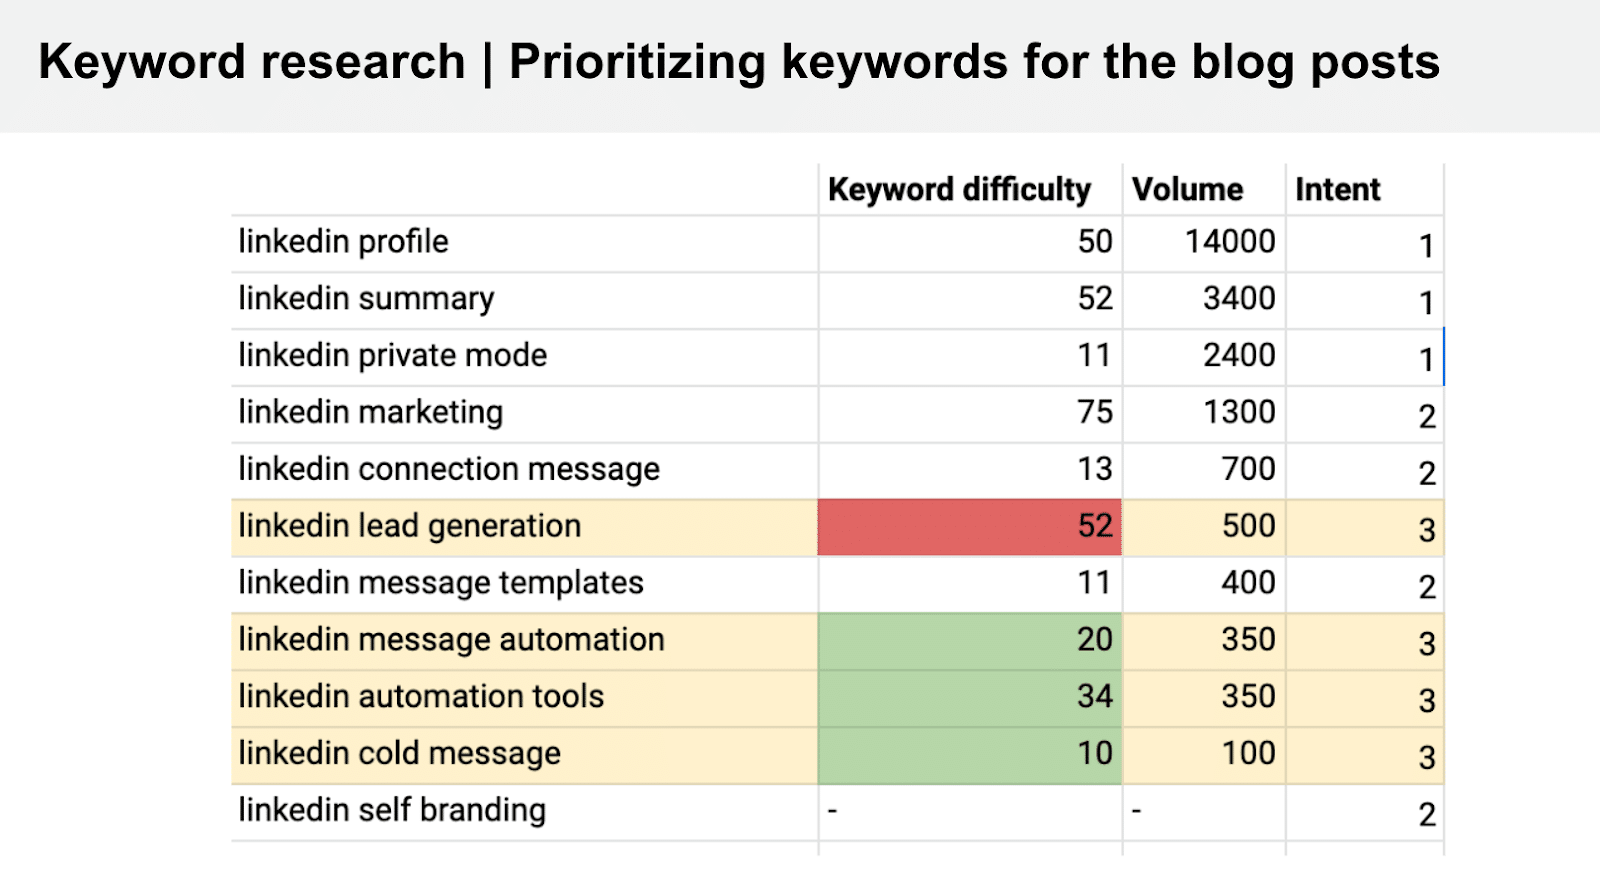 Keyword research: Prioritizing keywords for the SaaS blog posts